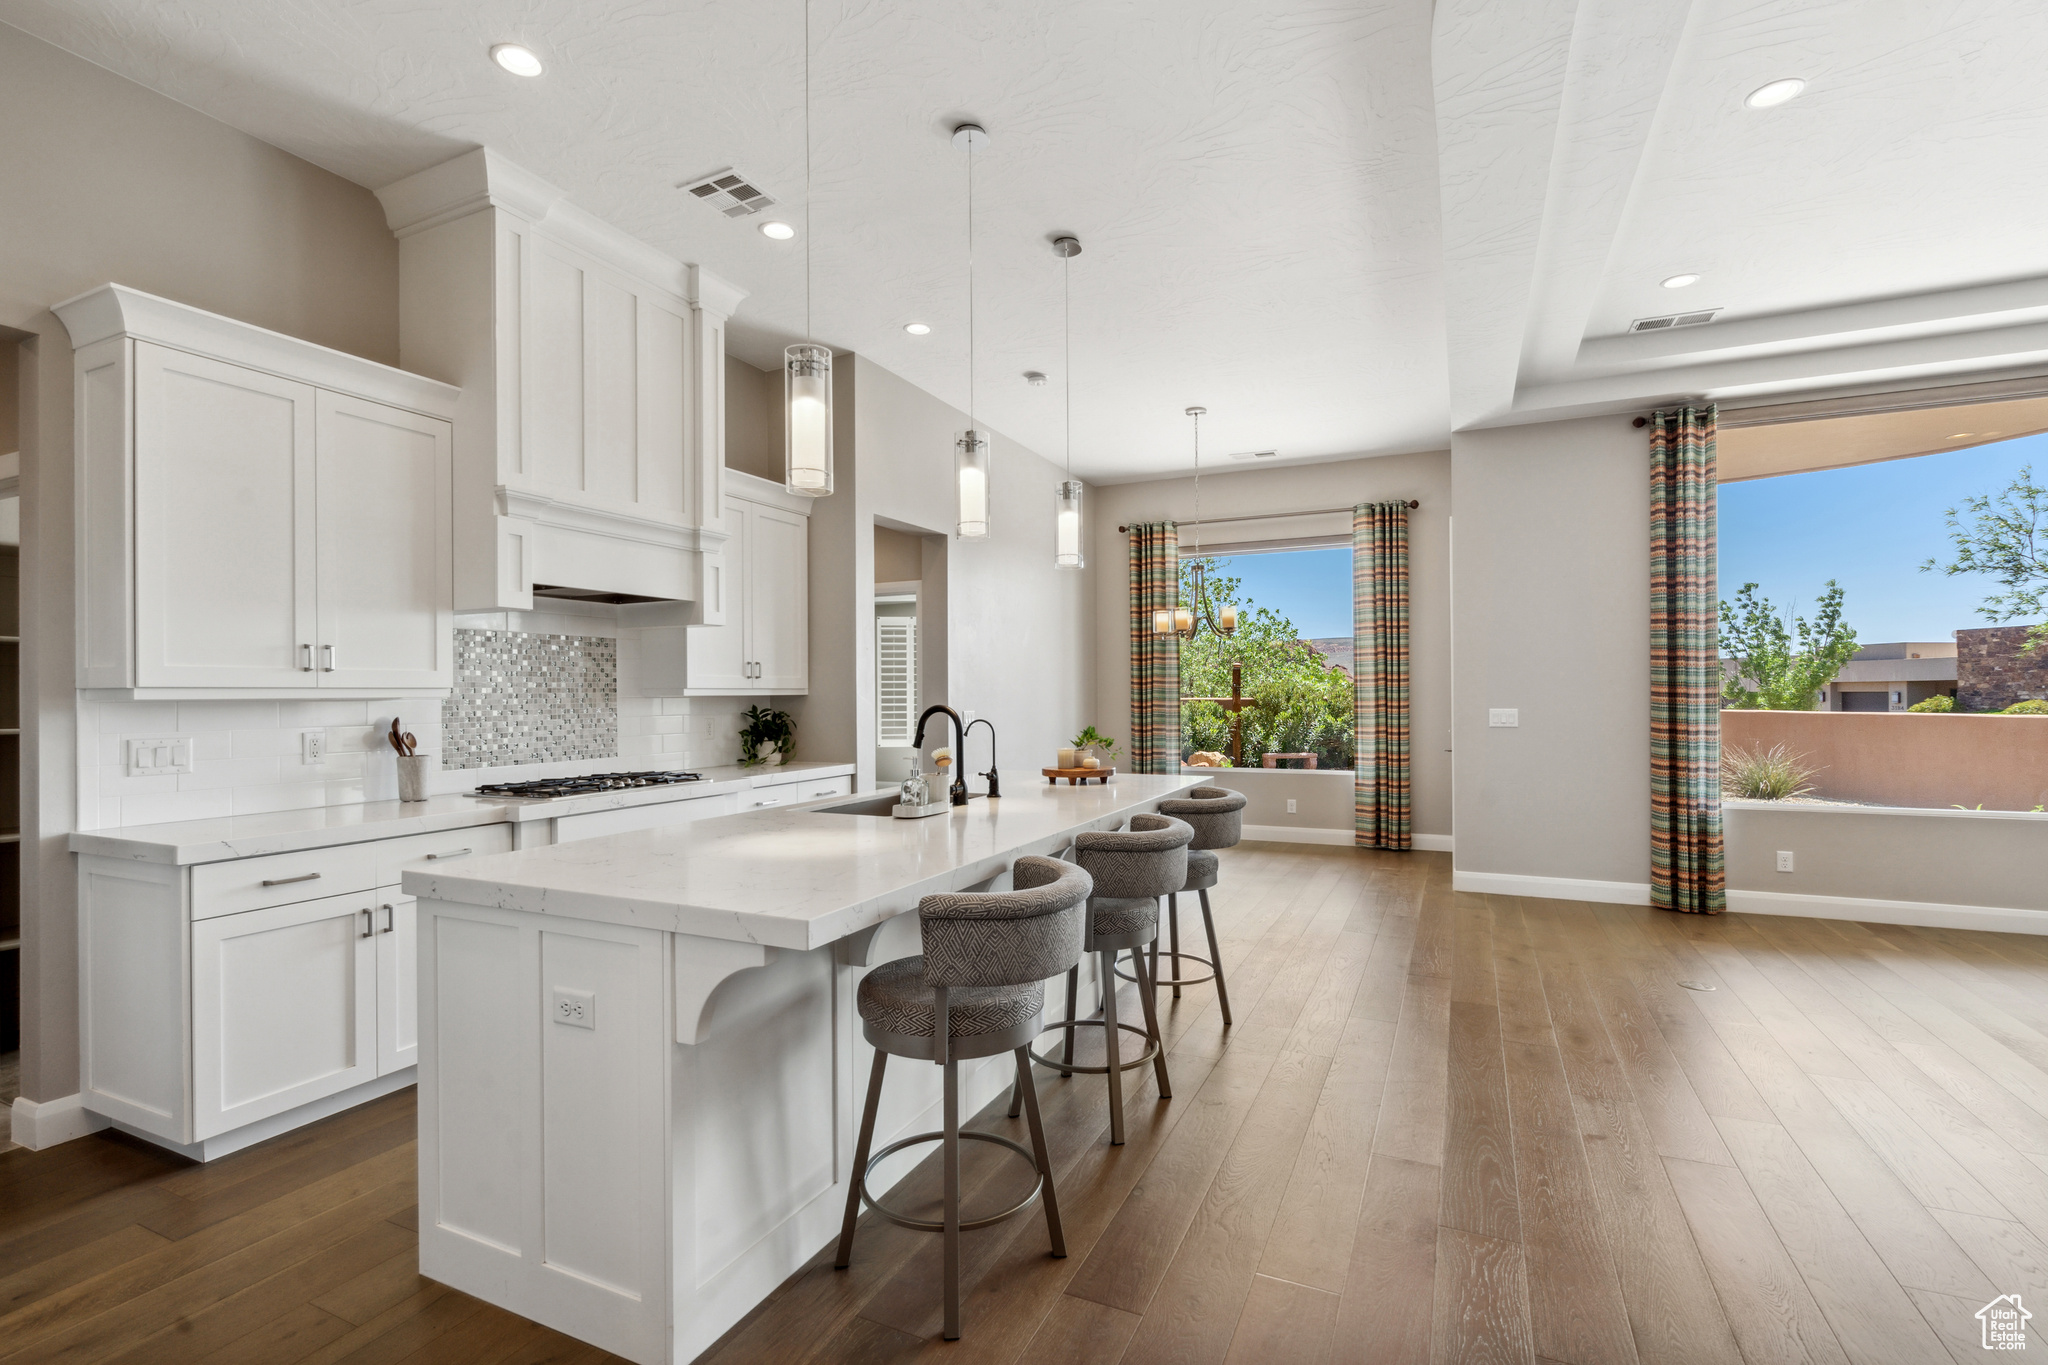 Kitchen with a wealth of natural light, dark hardwood / wood-style flooring, hanging light fixtures, and a center island with sink